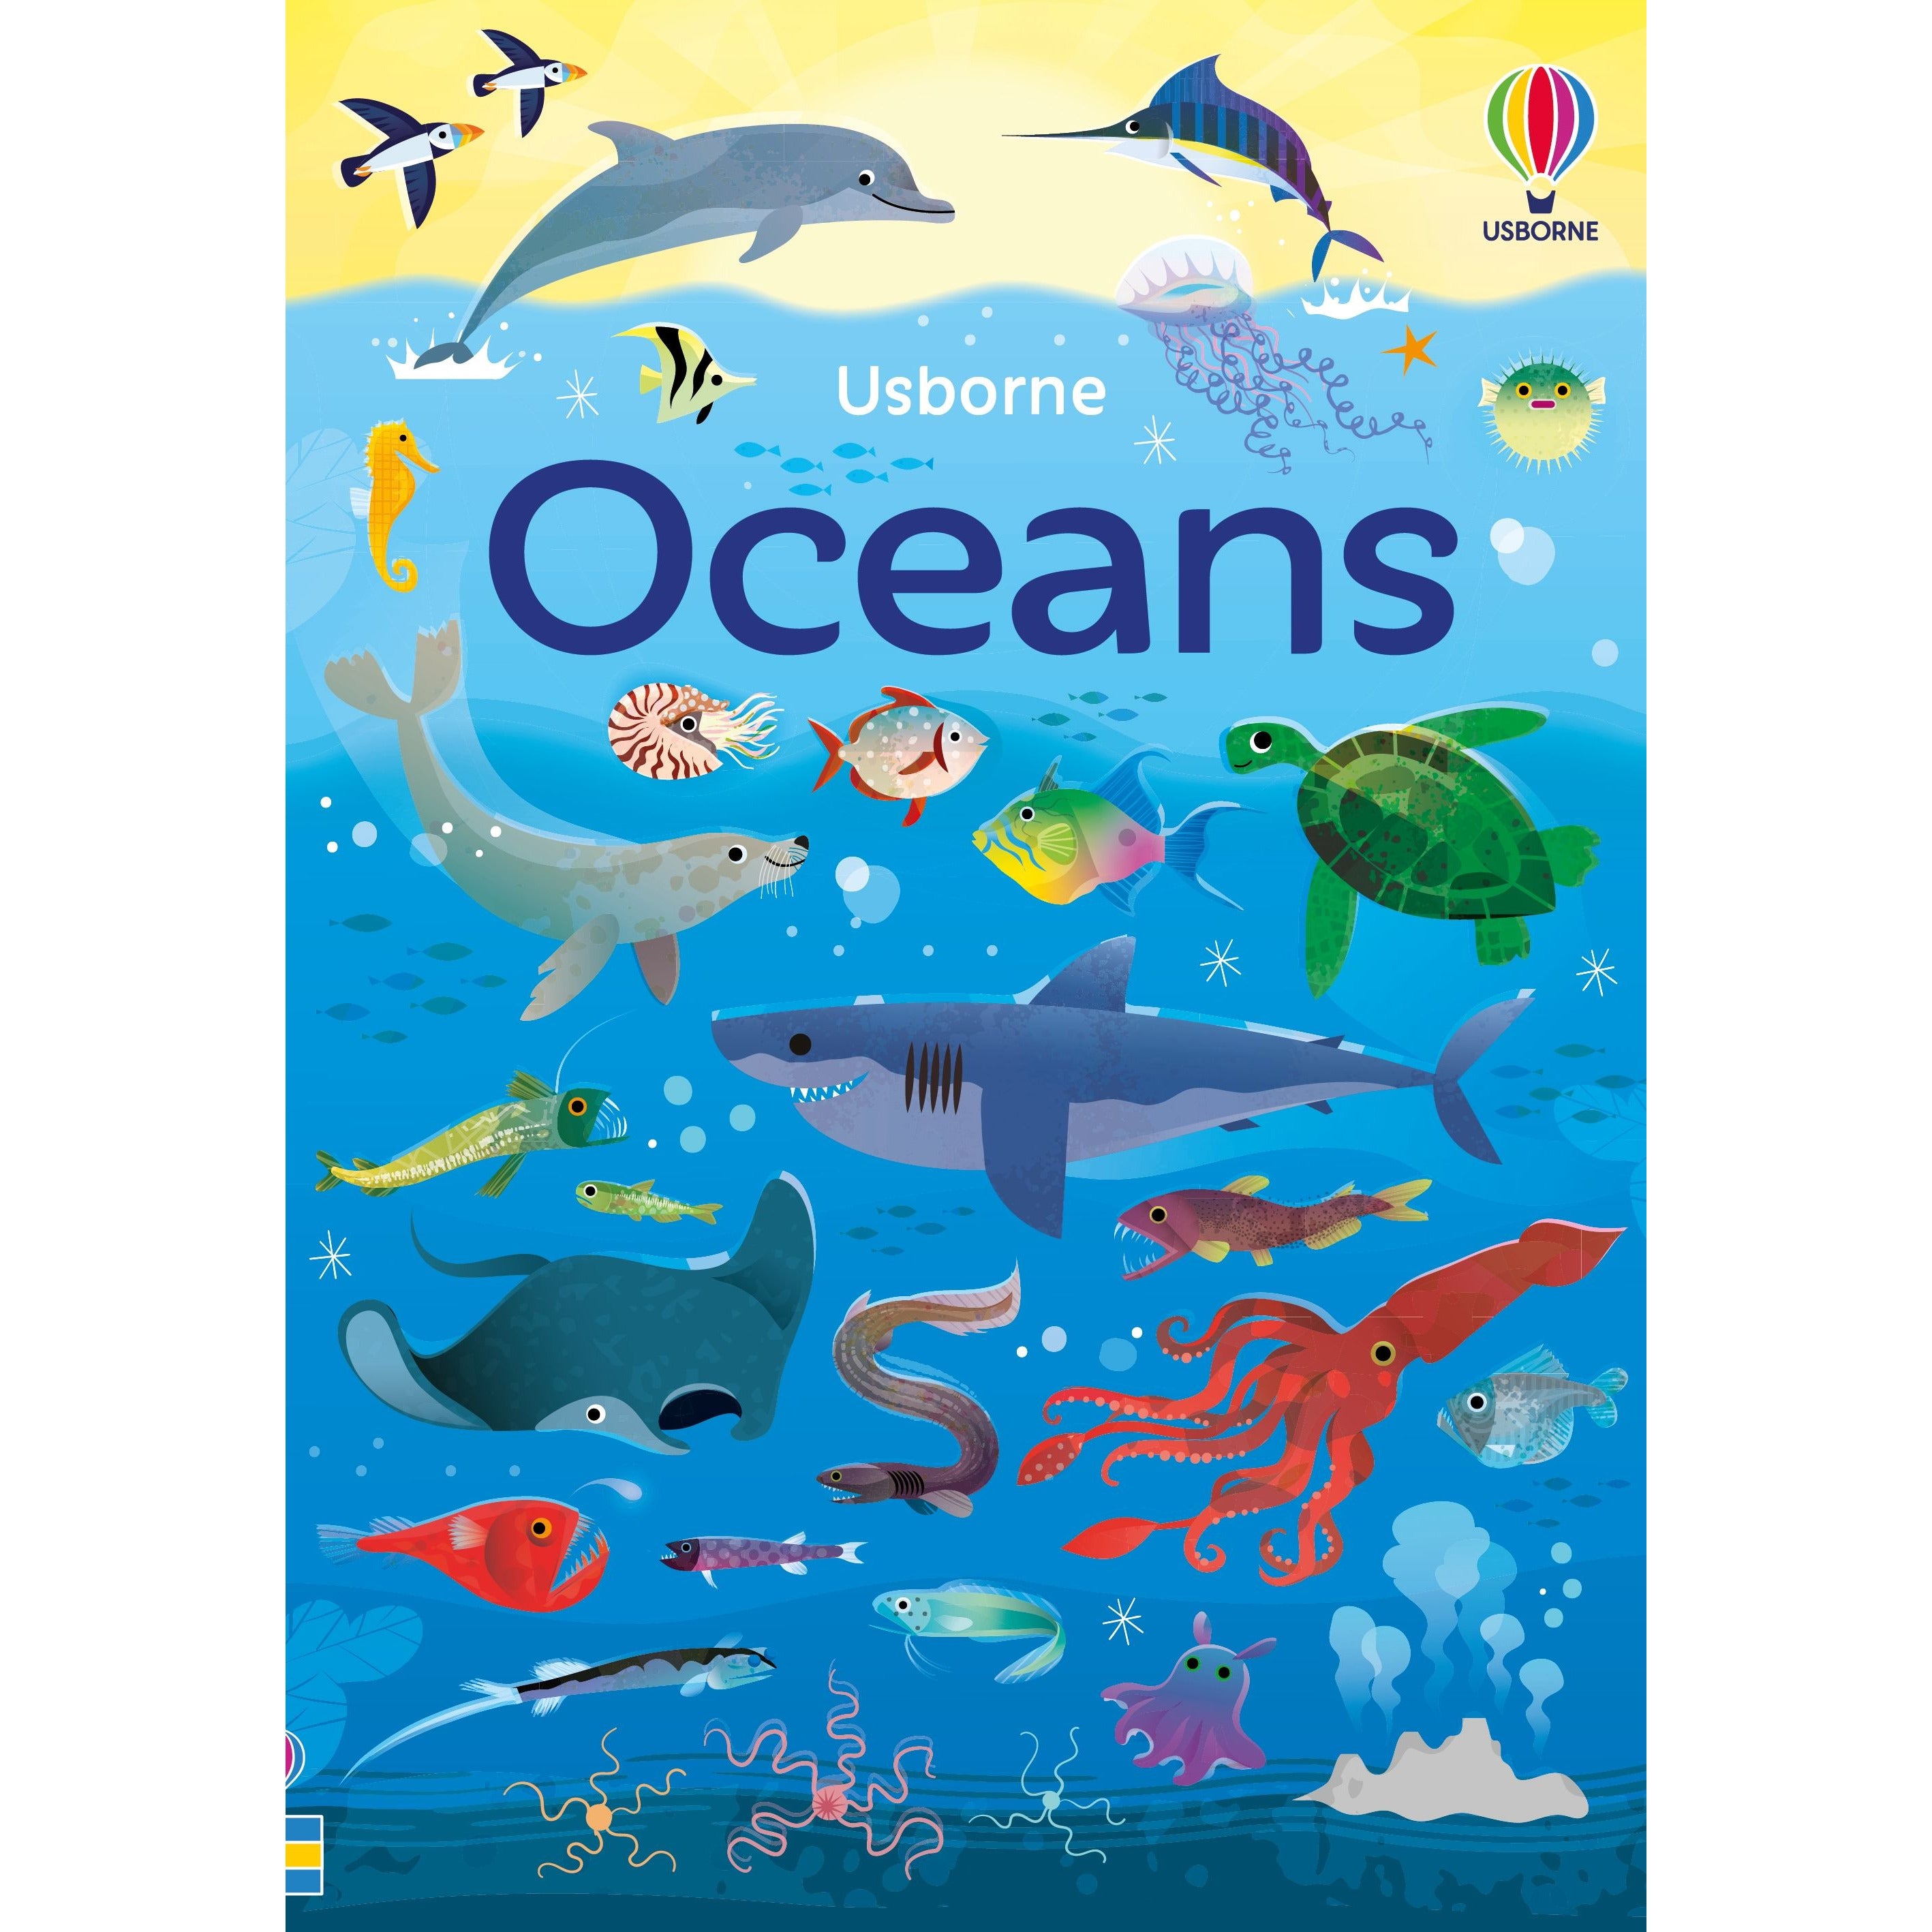 Book and 300 piece  Oceans Jigsaw Puzzle